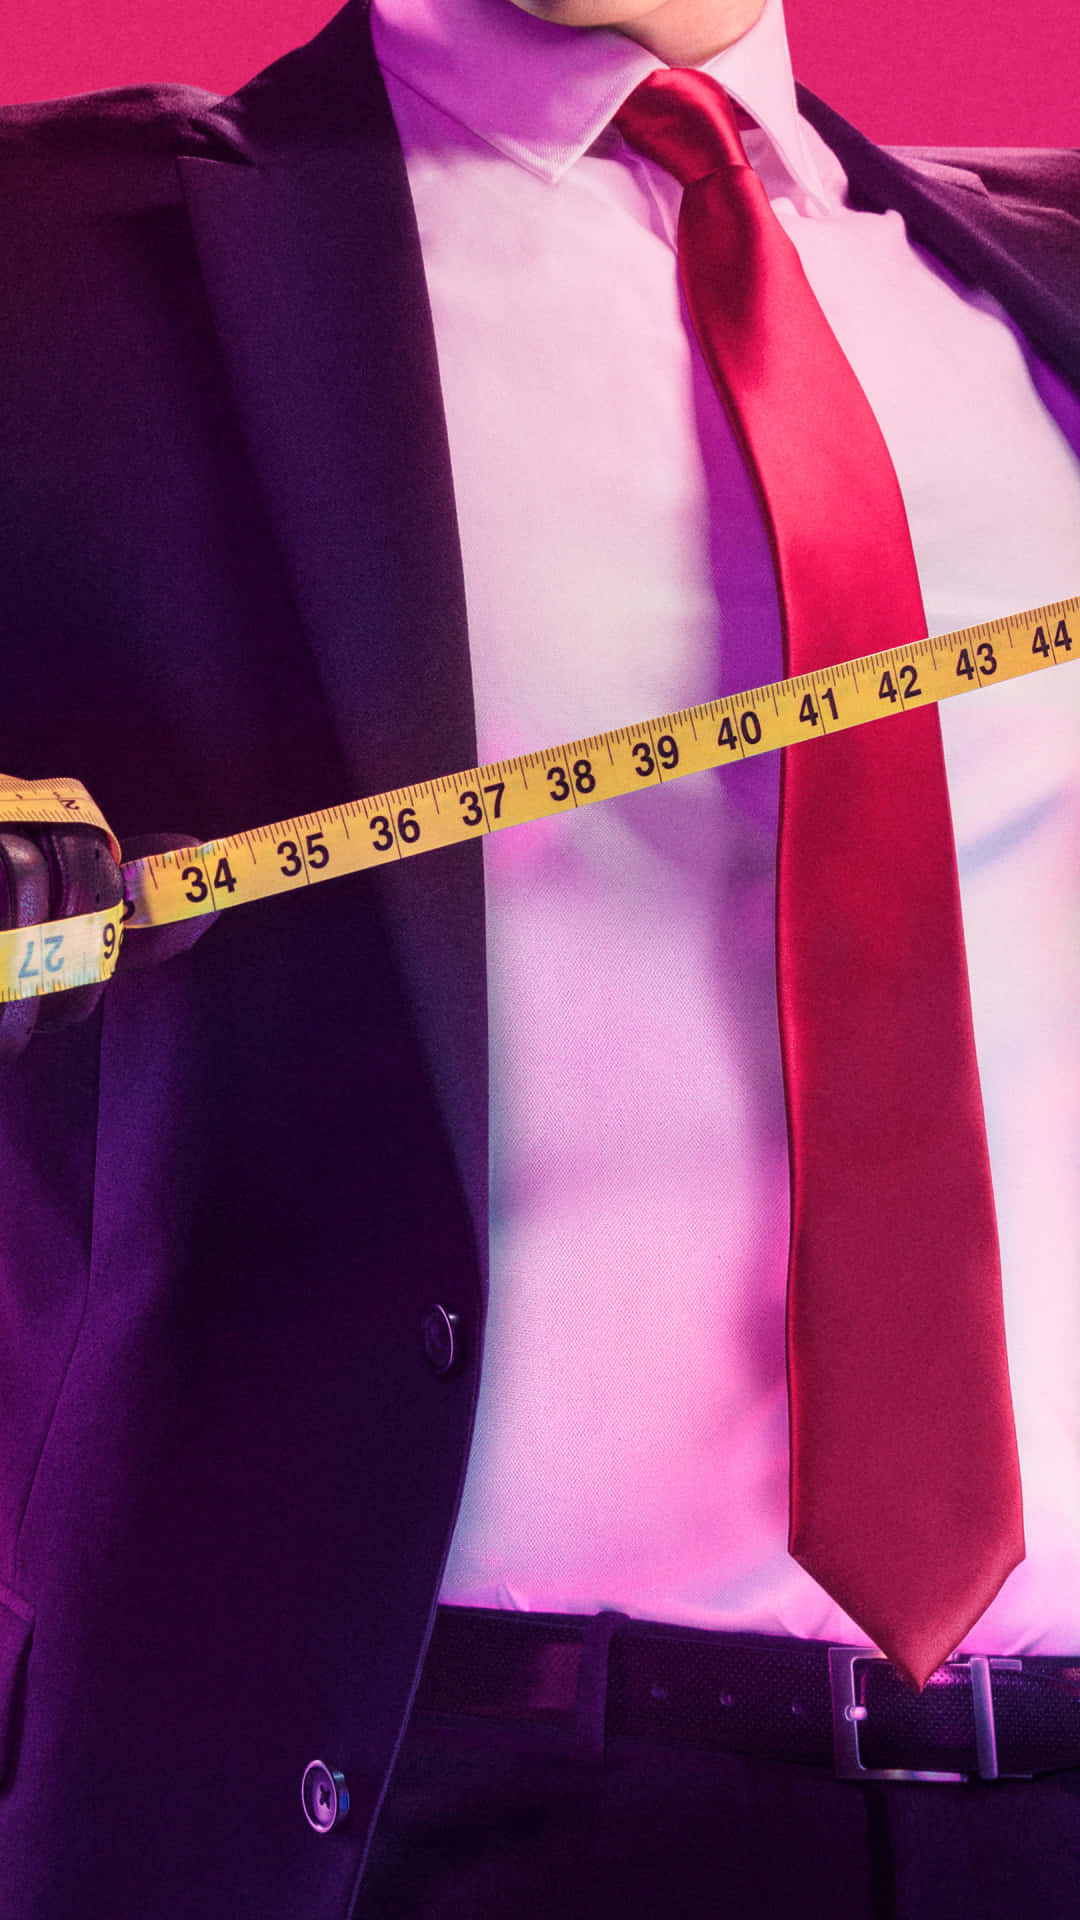 A Man In A Suit And Tie Holding A Measuring Tape